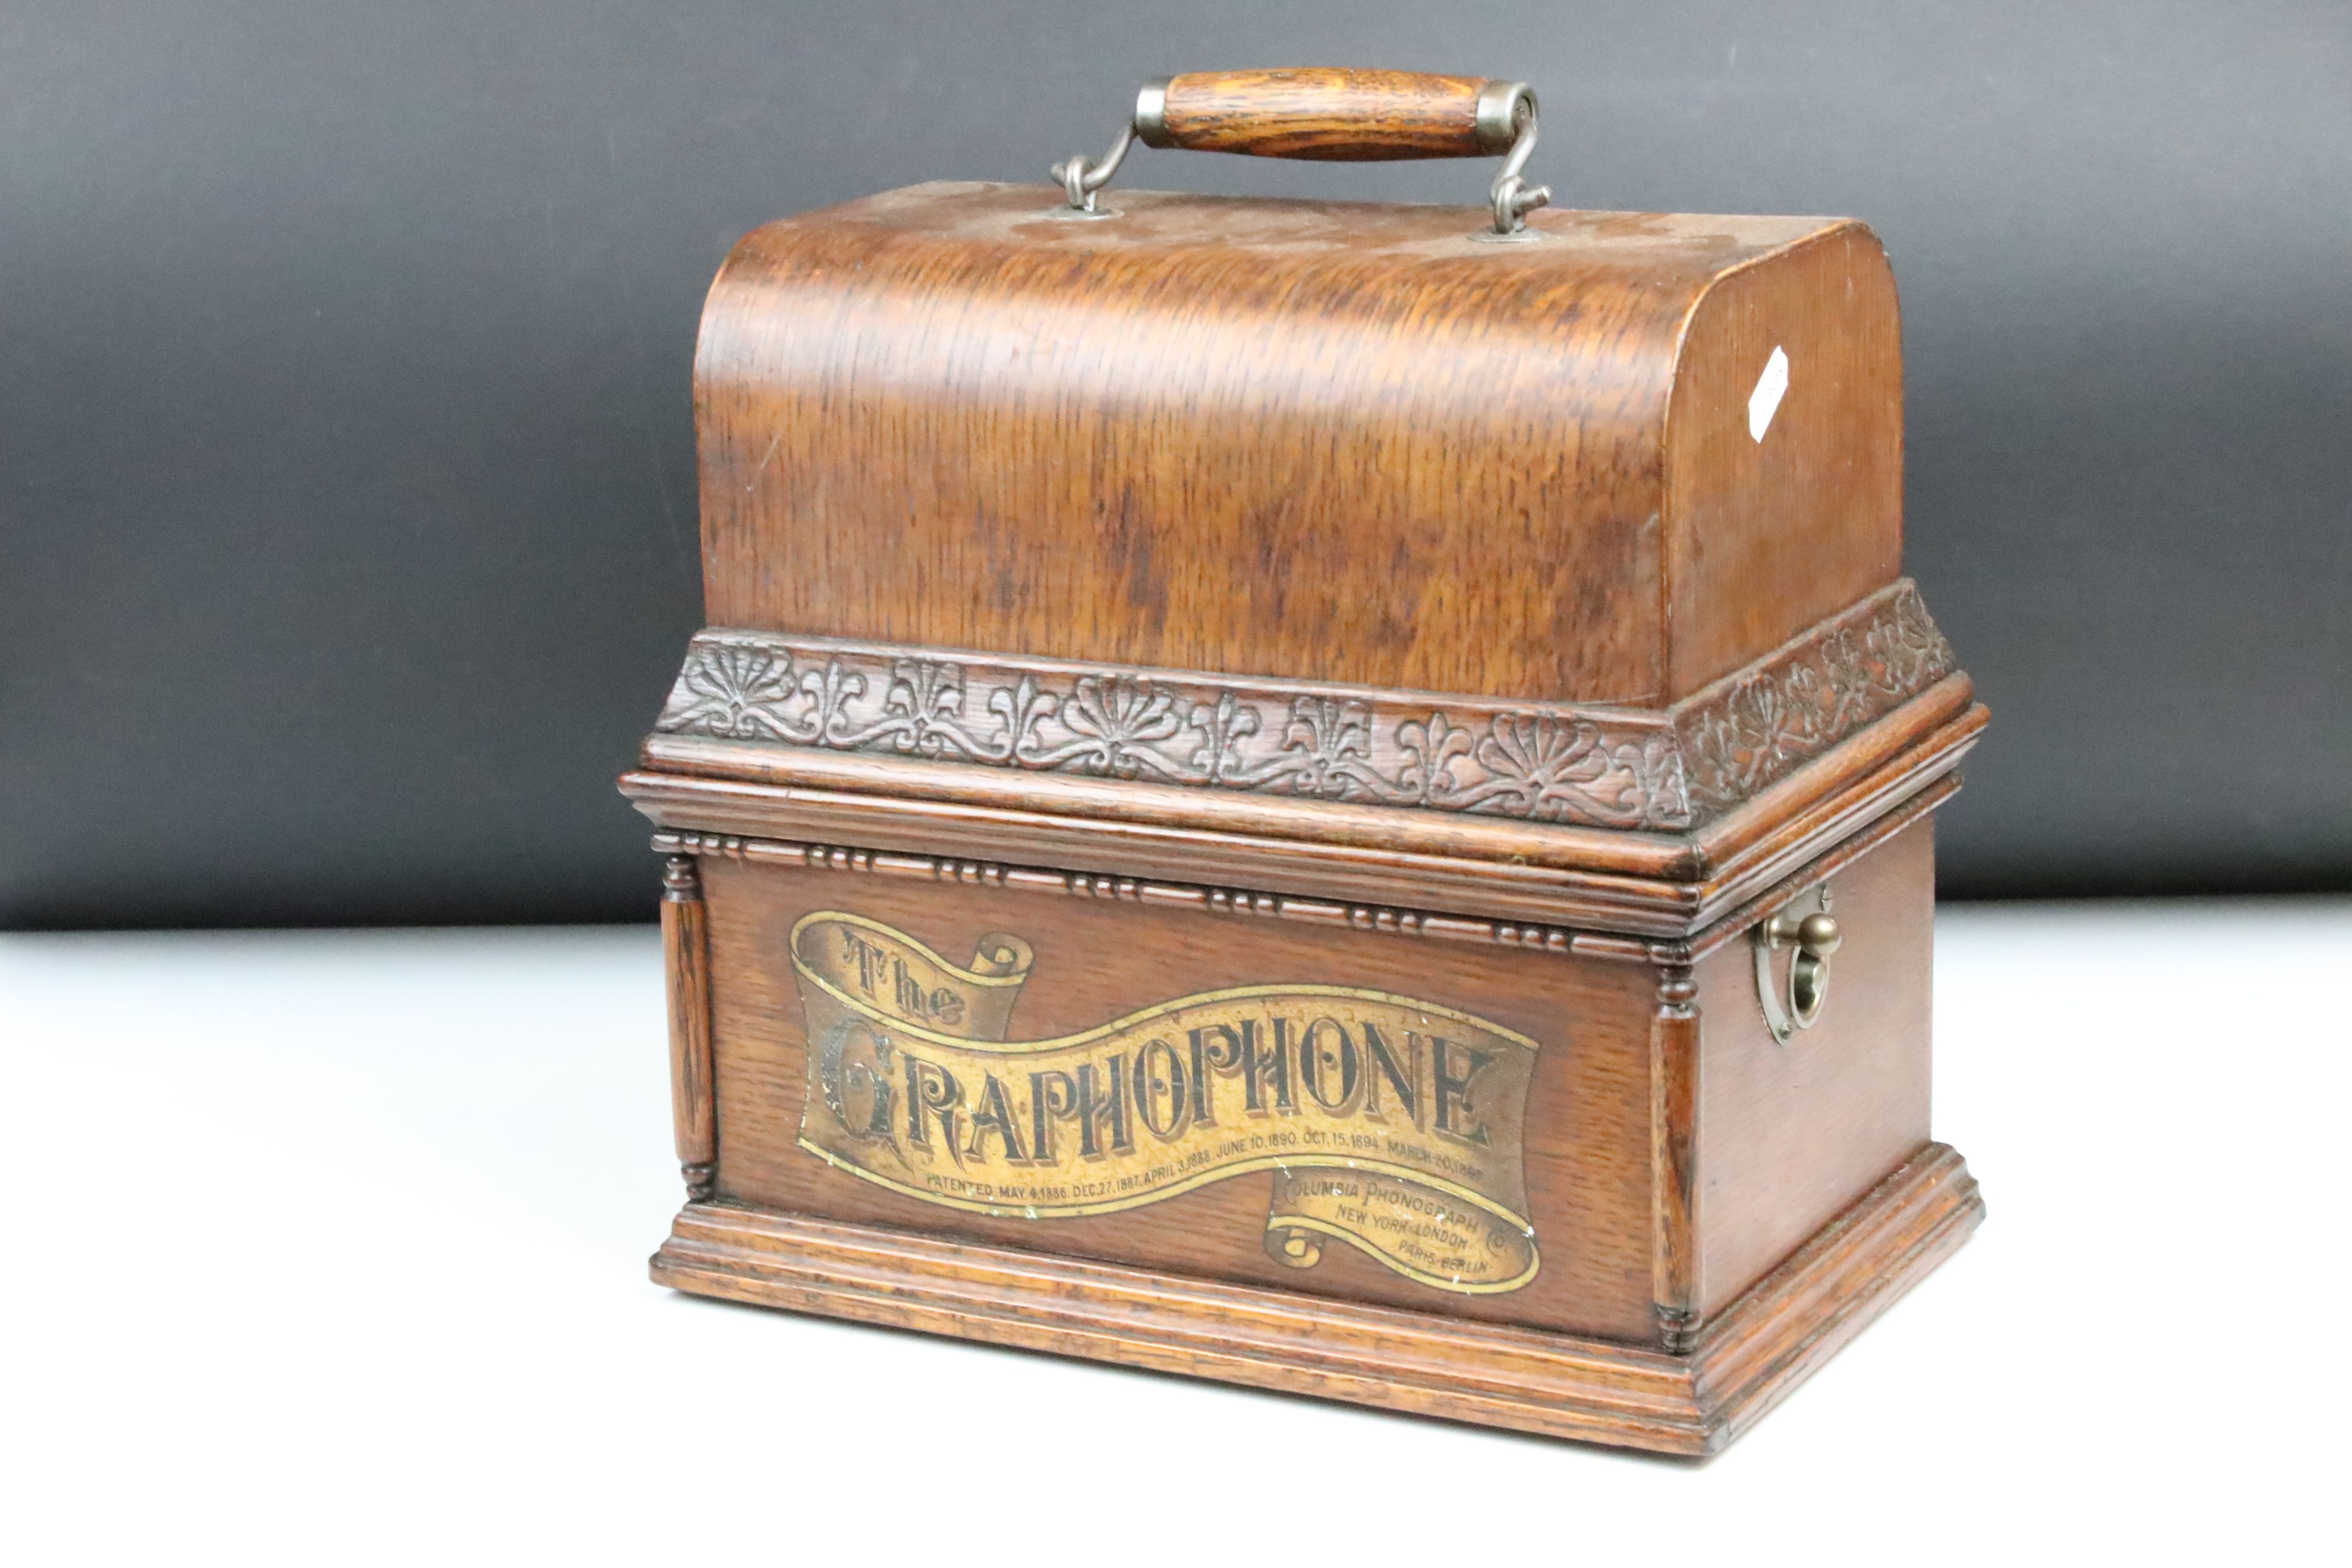 'The Graphophone' early 20th century Columbia Phonograph, Type AT, no. 269135, oak cased, with - Image 7 of 10